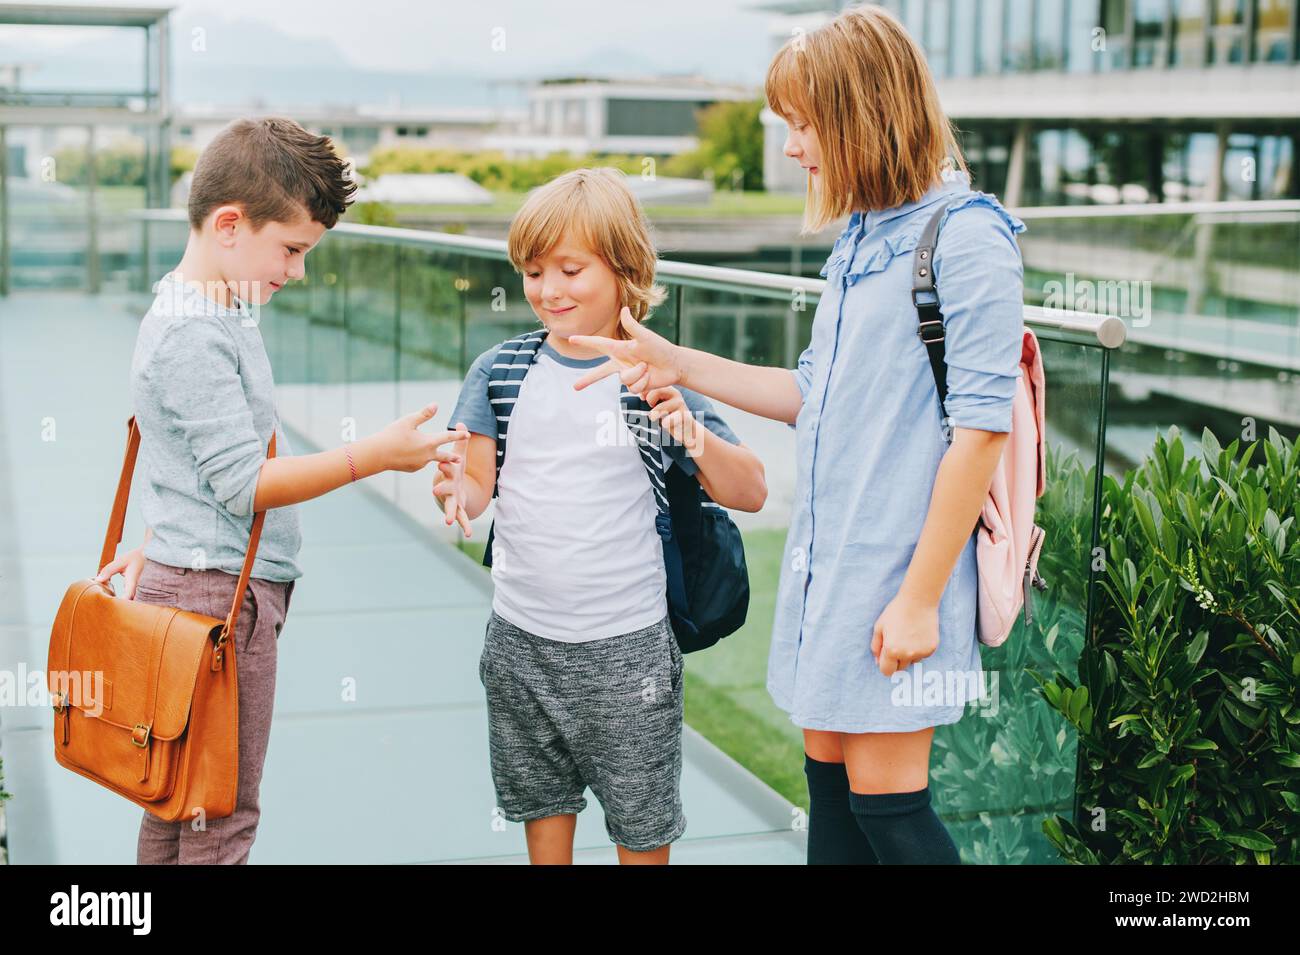 Group of 3 kids playing Rock, Paper, Scissors game on schoolyard. Back to school concept, fashion for children Stock Photo